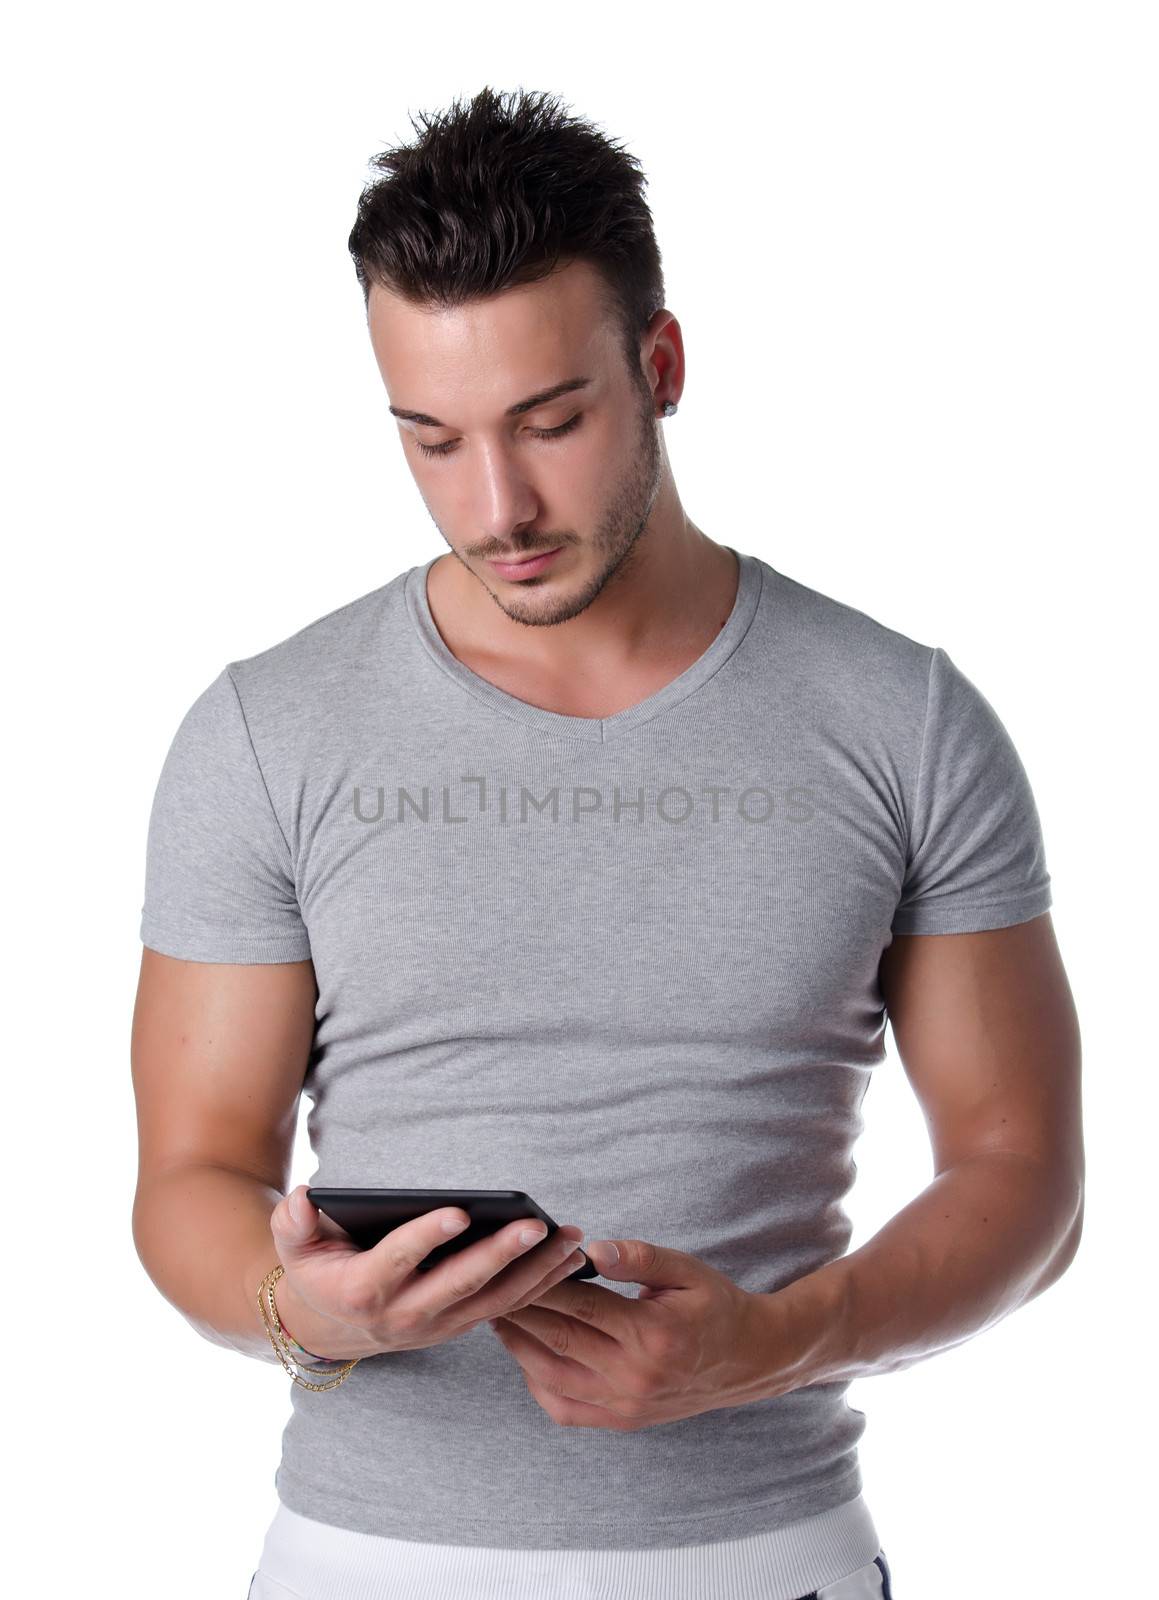 Athletic young man reading book on ebook reader by artofphoto